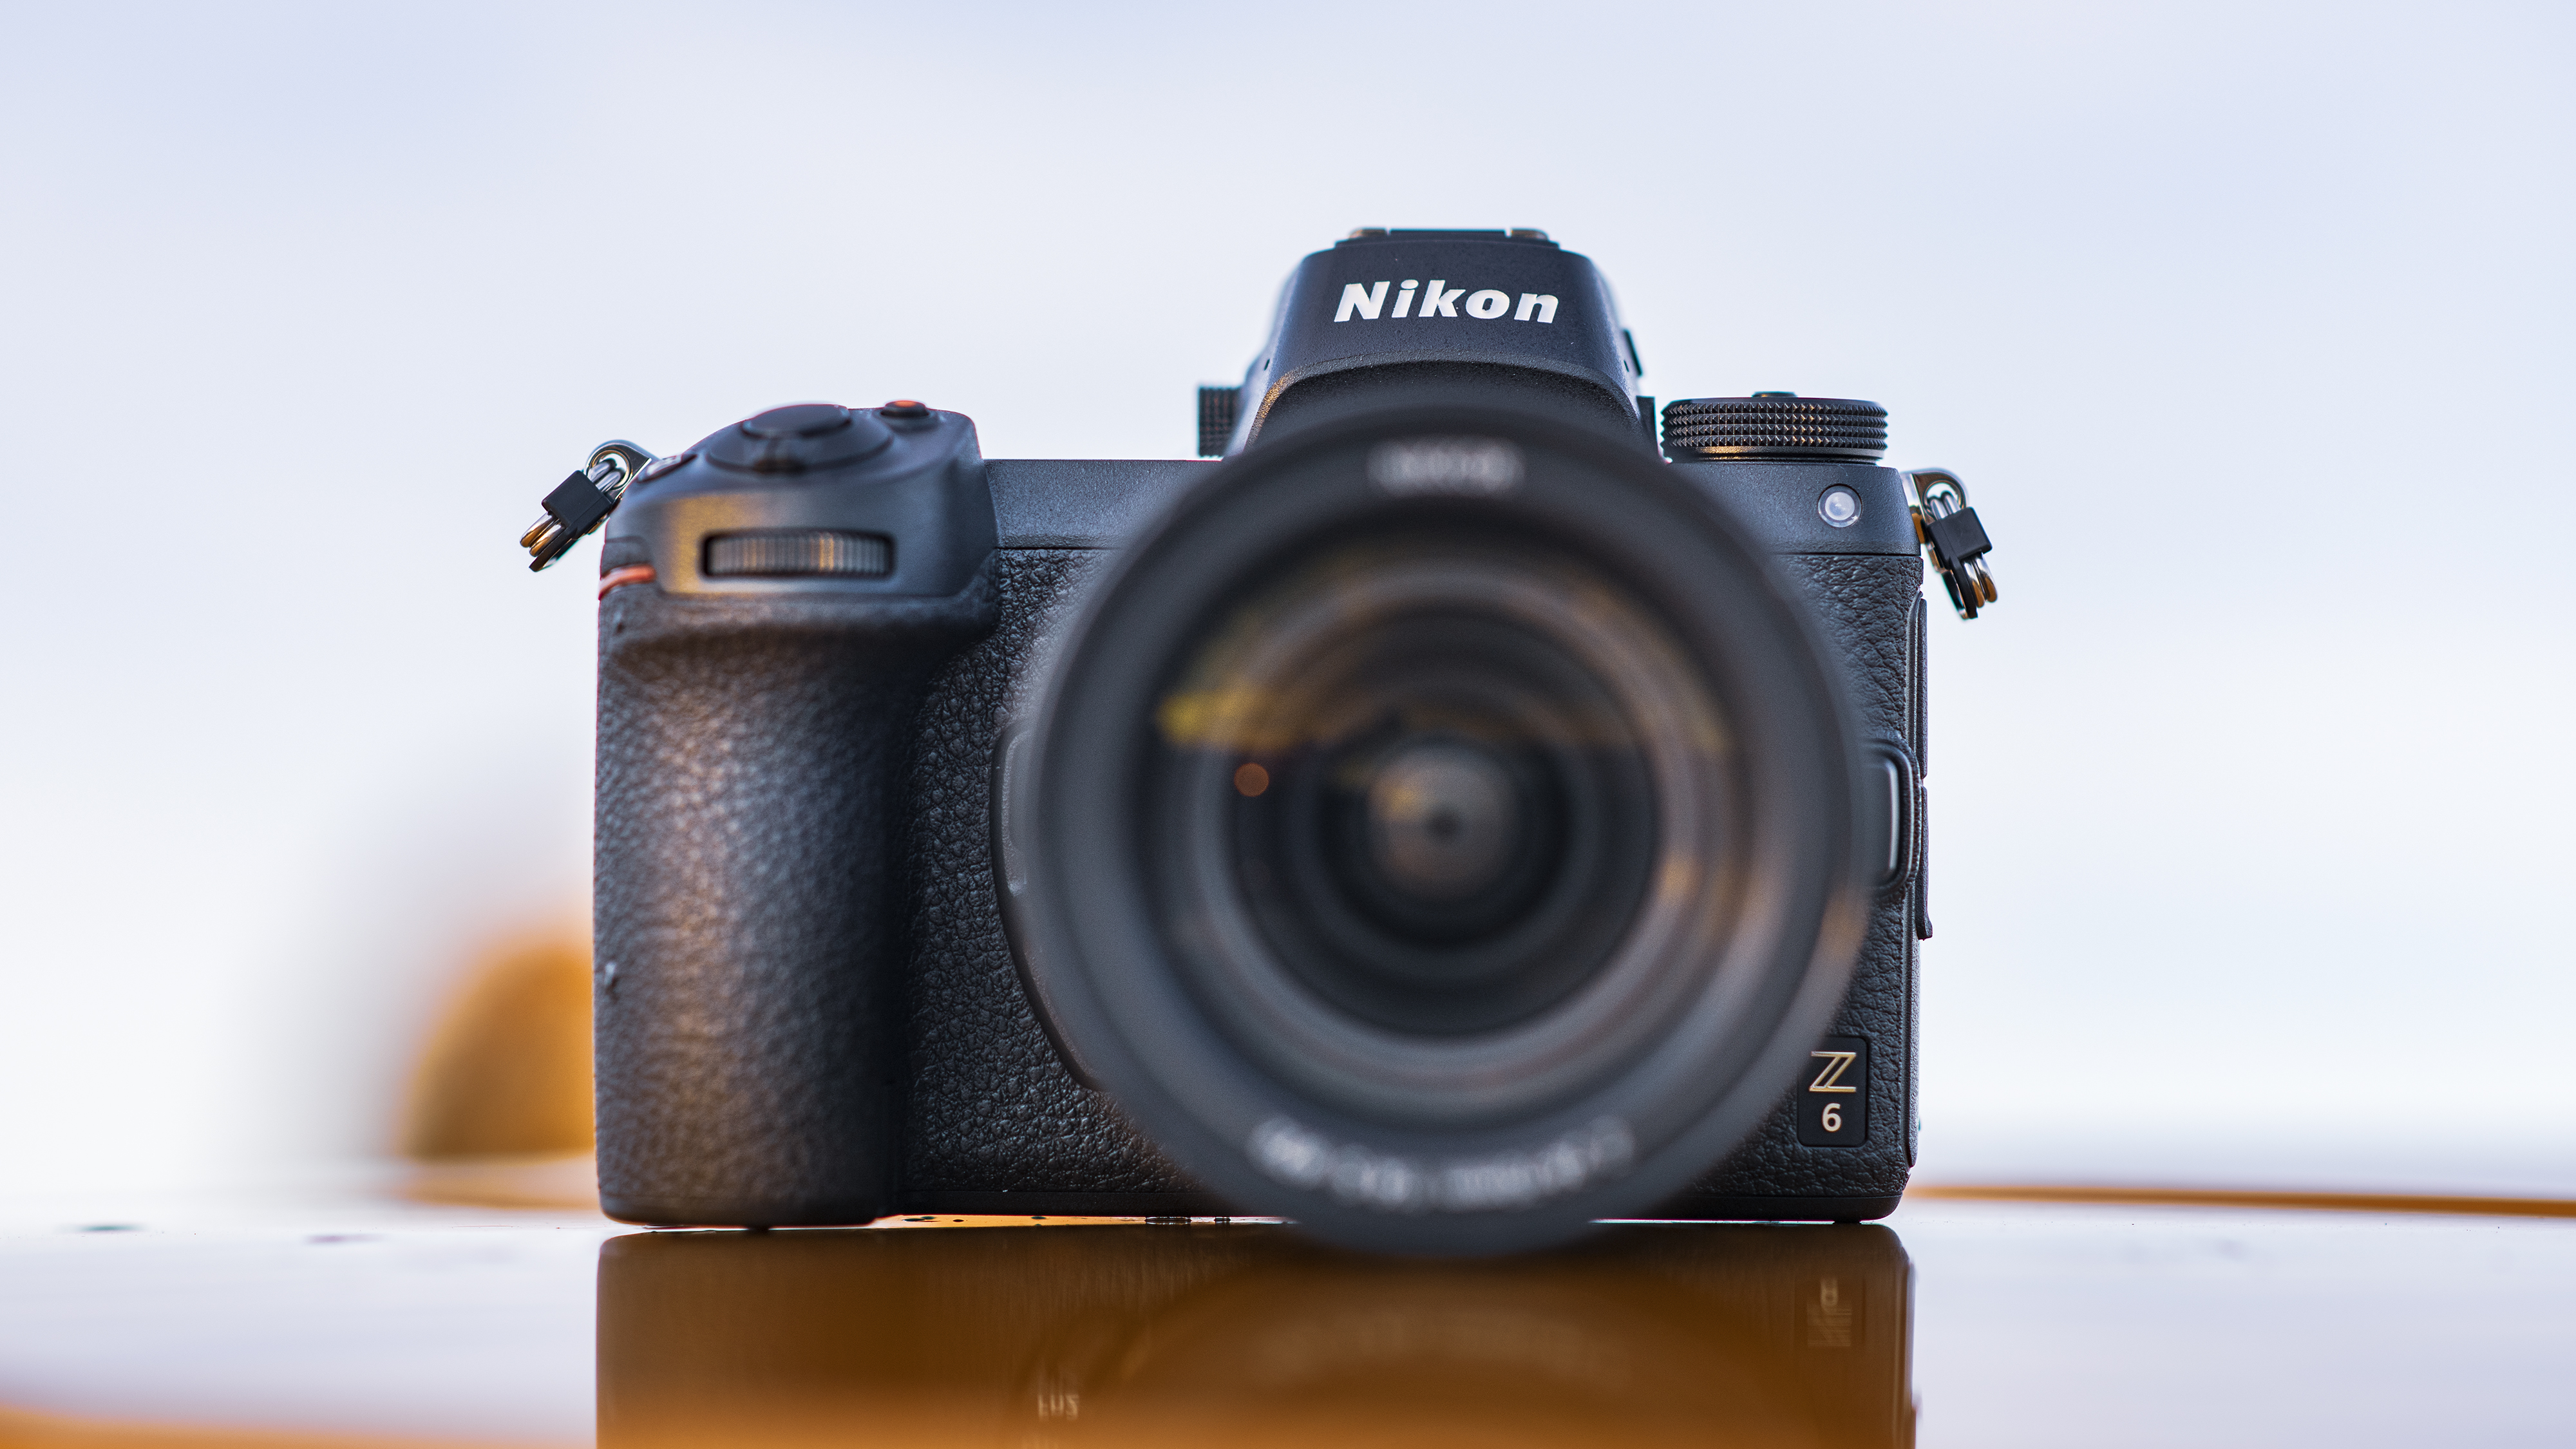 Best Nikon camera 2020: the 10 finest cameras from Nikon's line-up 2